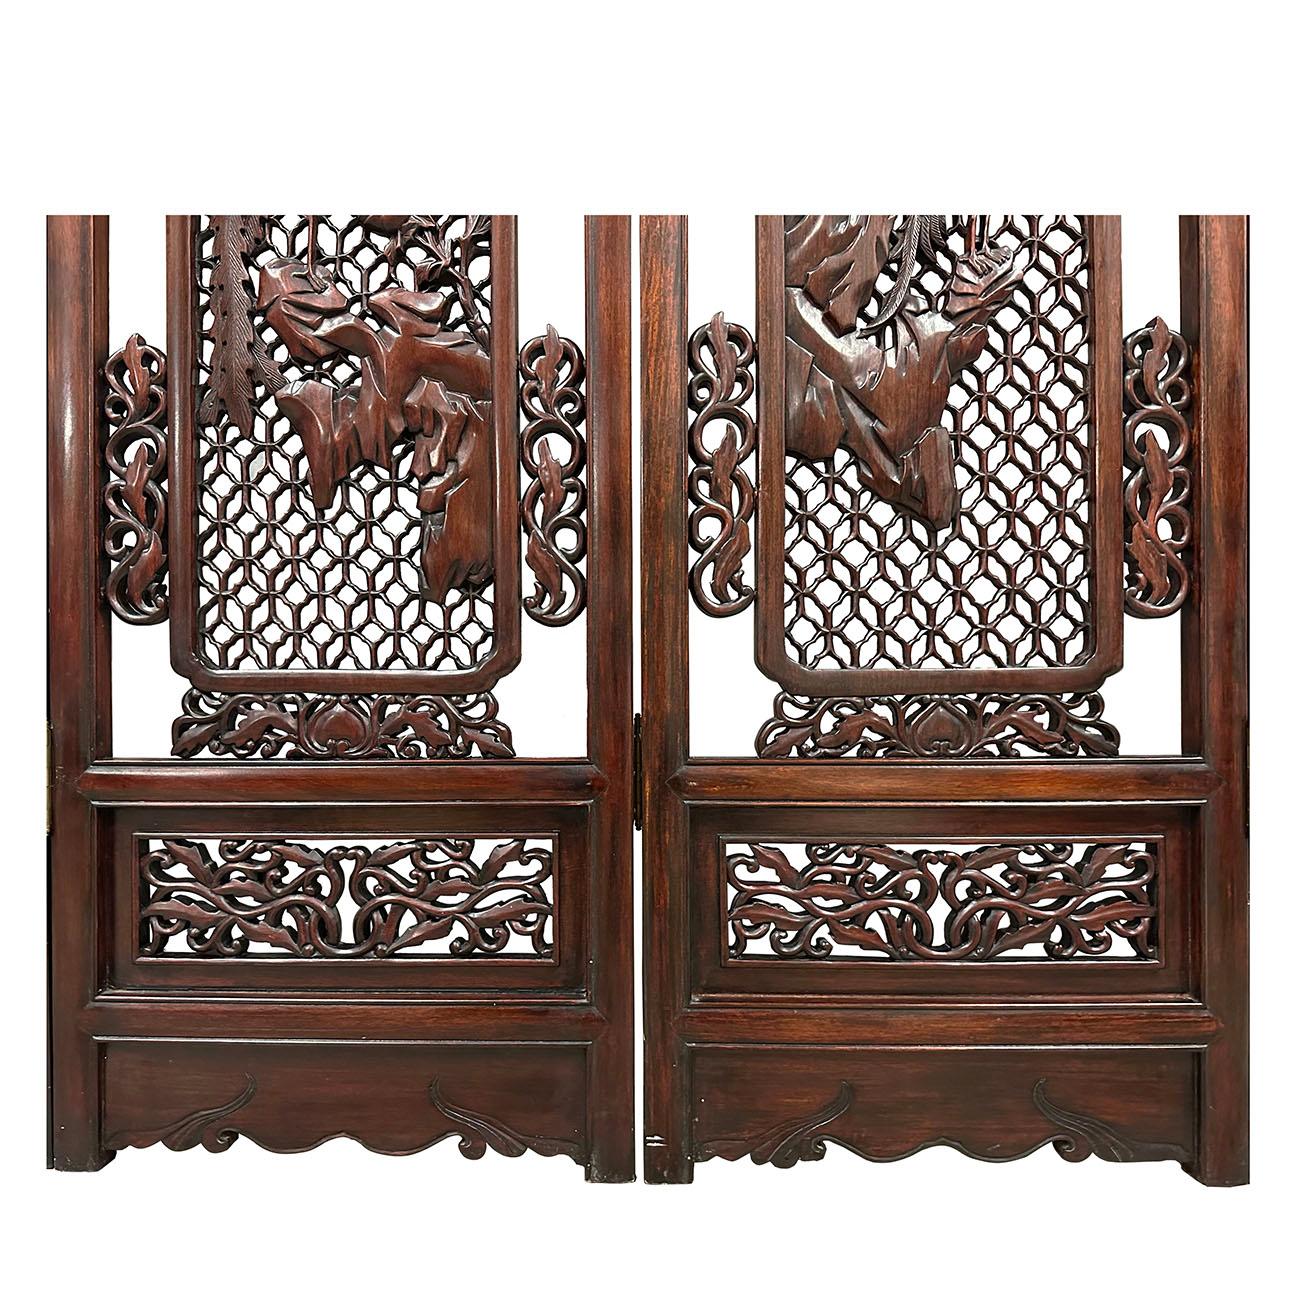 Mid-20th Century Chinese Rosewood Open Carved Screen/Room Divider For Sale 3